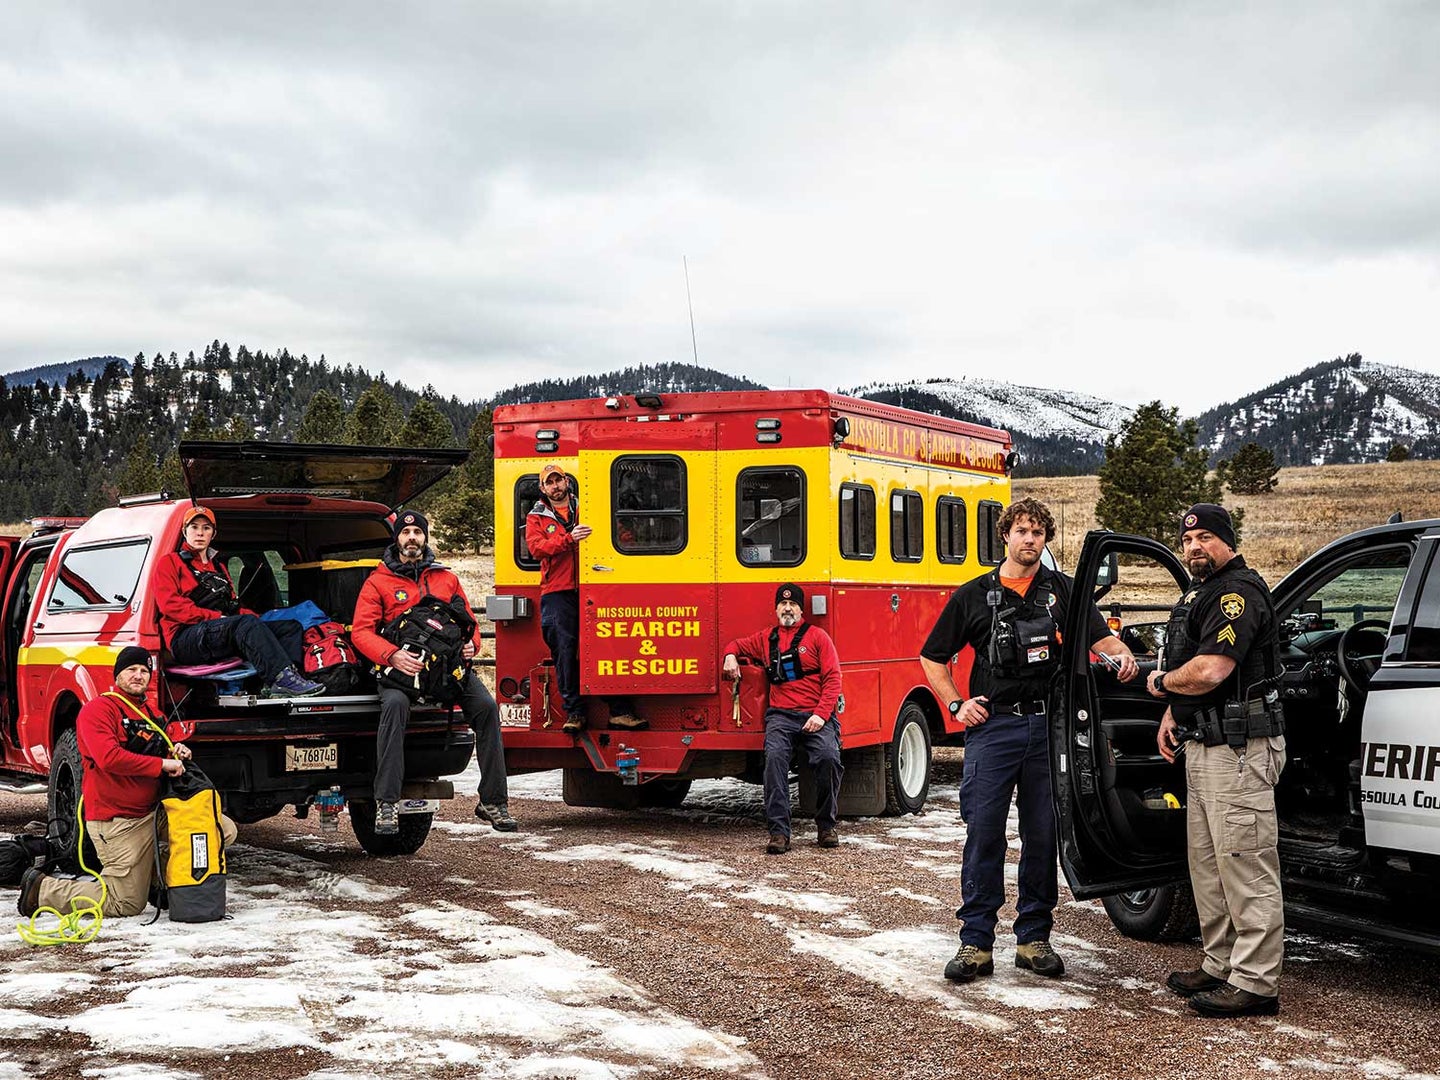 A search and rescue team preparing for training.